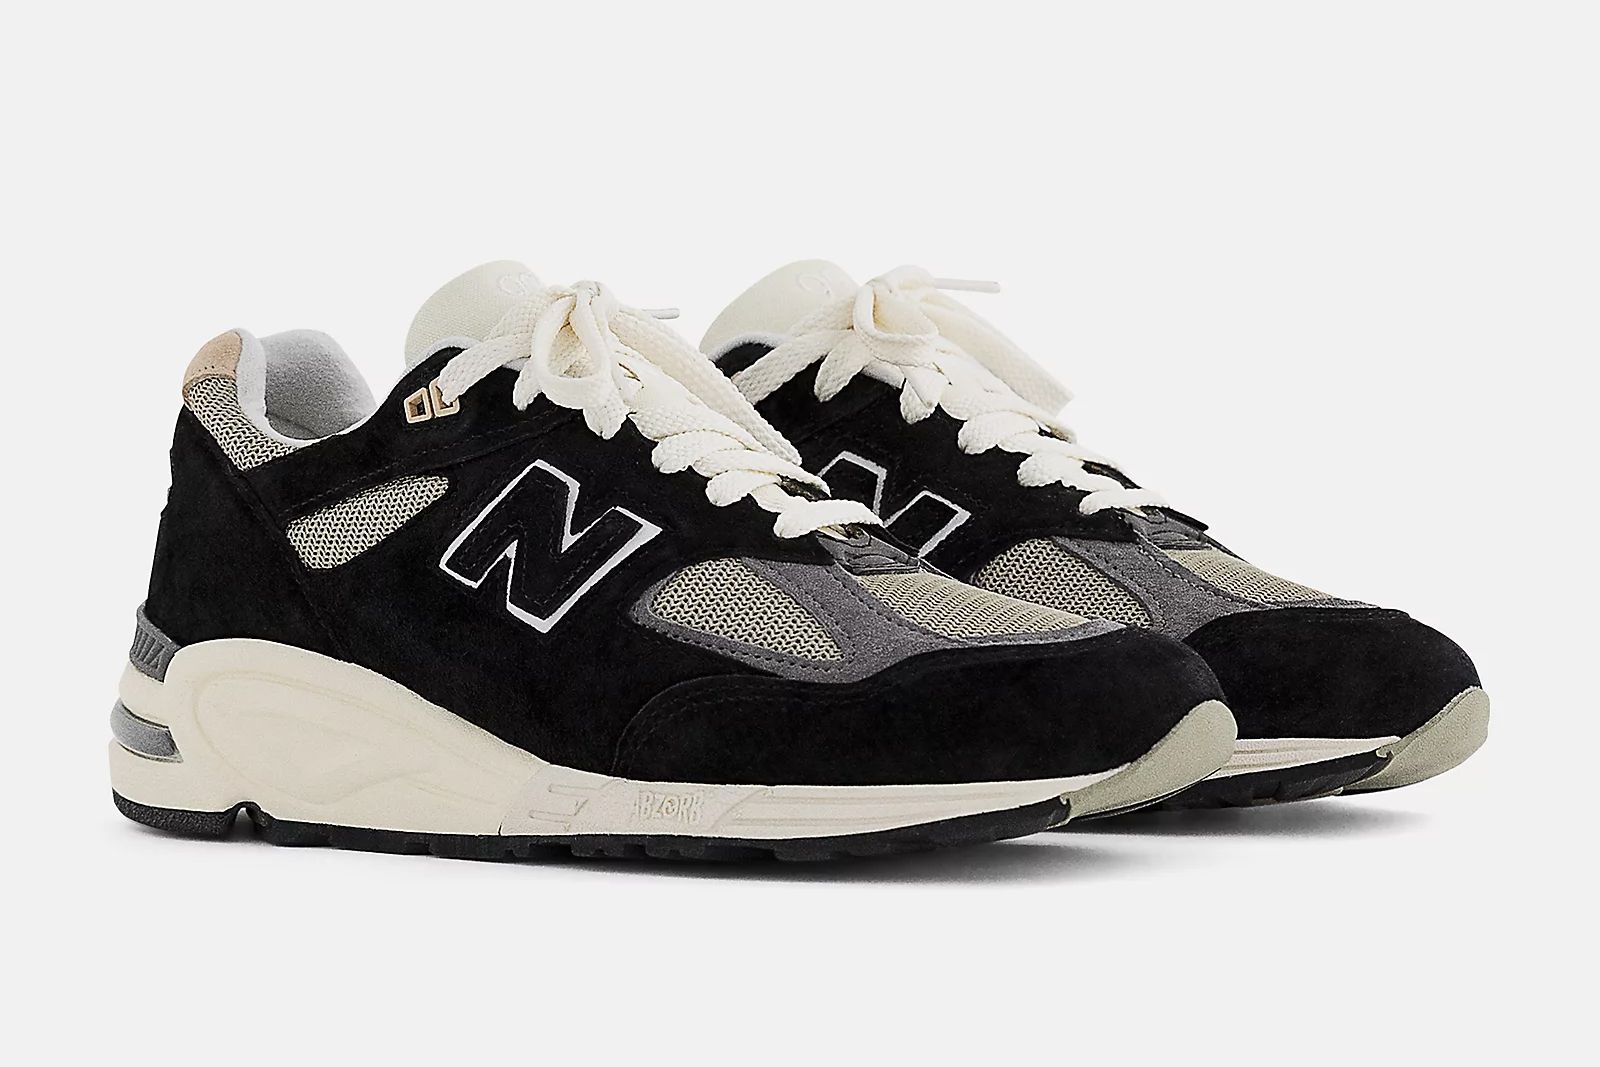 New Balance's MADE in USA Line Tunes Up the 990v2 in 'Black/True